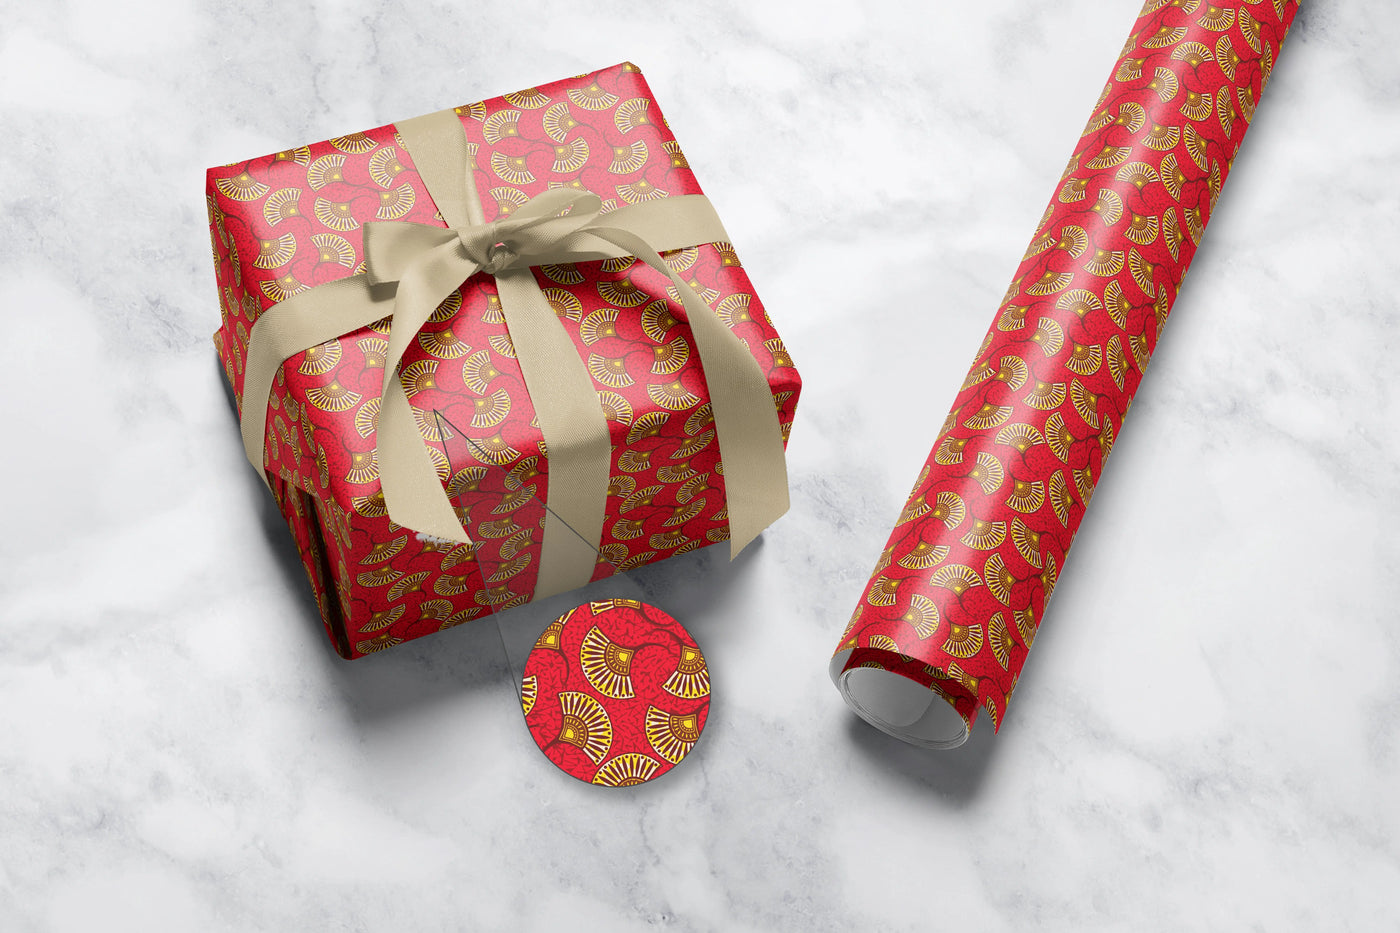 Red and Gold Ankara Fan Gift Wrap 1 Metre Roll - All Shades